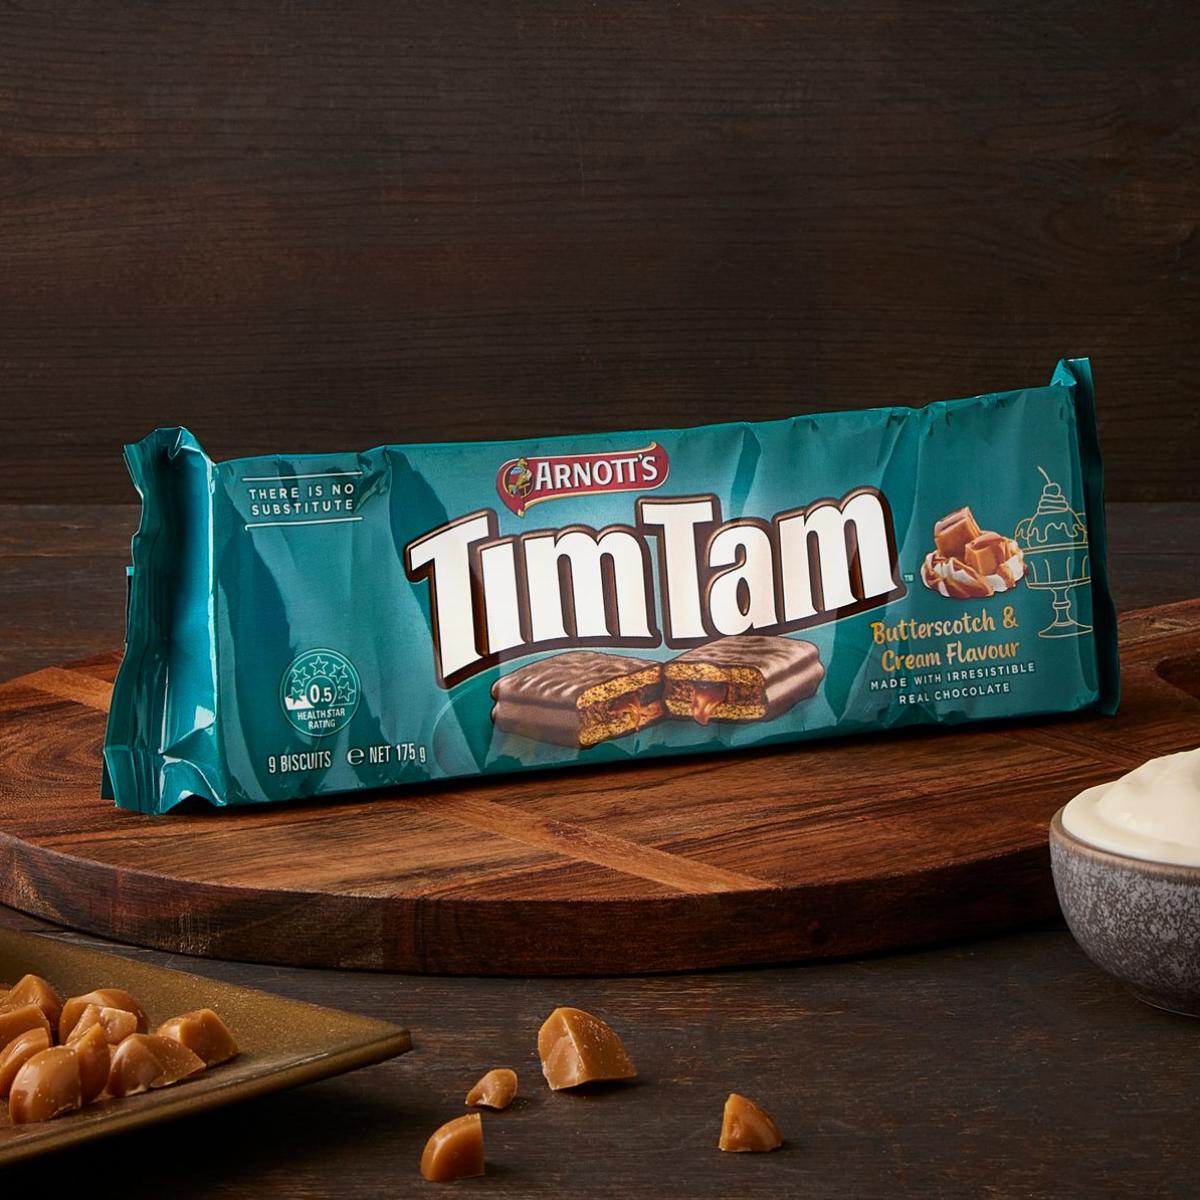 Tim Tams Is Releasing A New Flavour: Butterscotch & Cream!